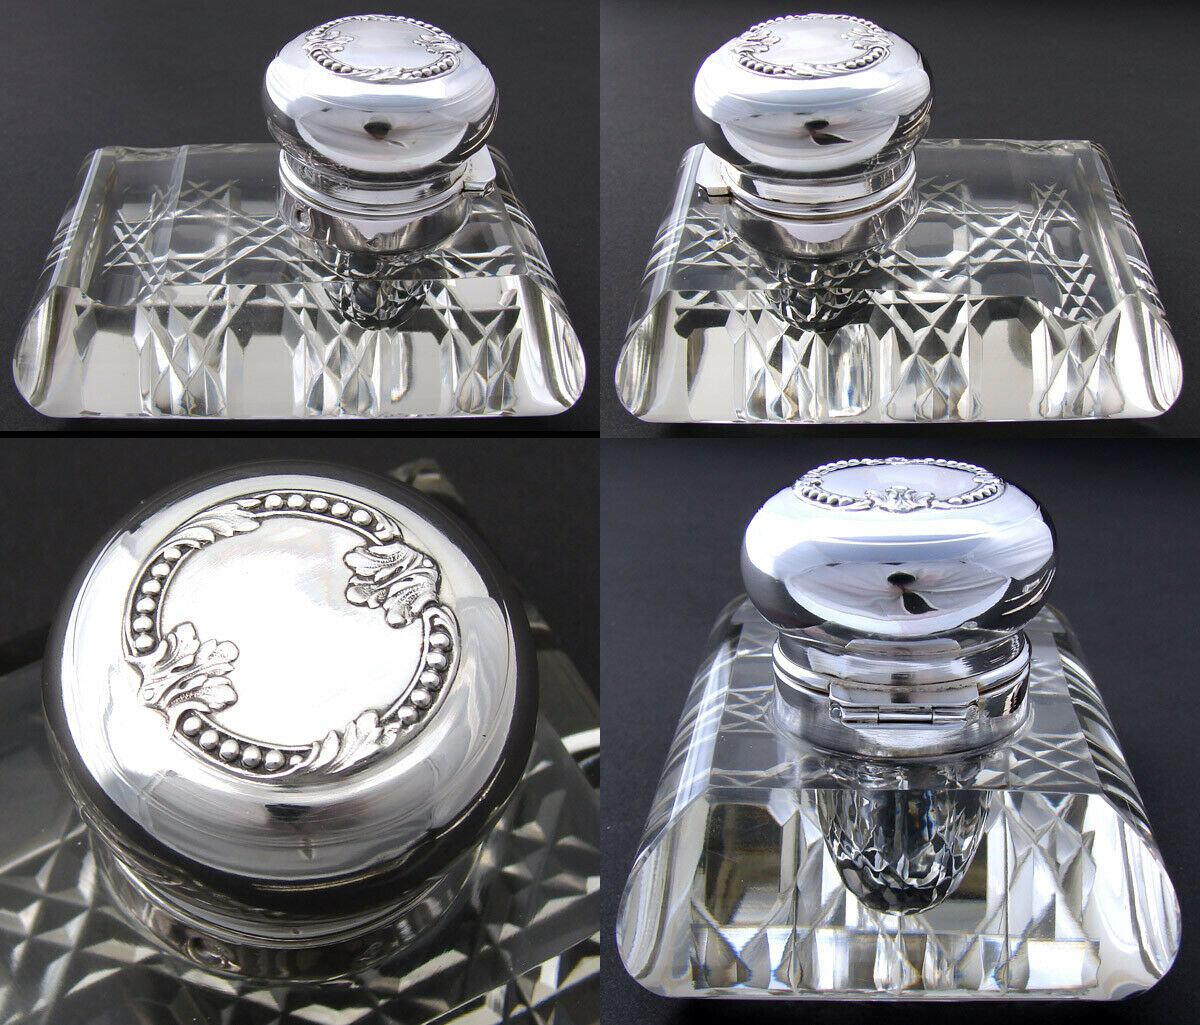 Louis Vuitton Writing Set with Two Crystal Inkwells at 1stDibs